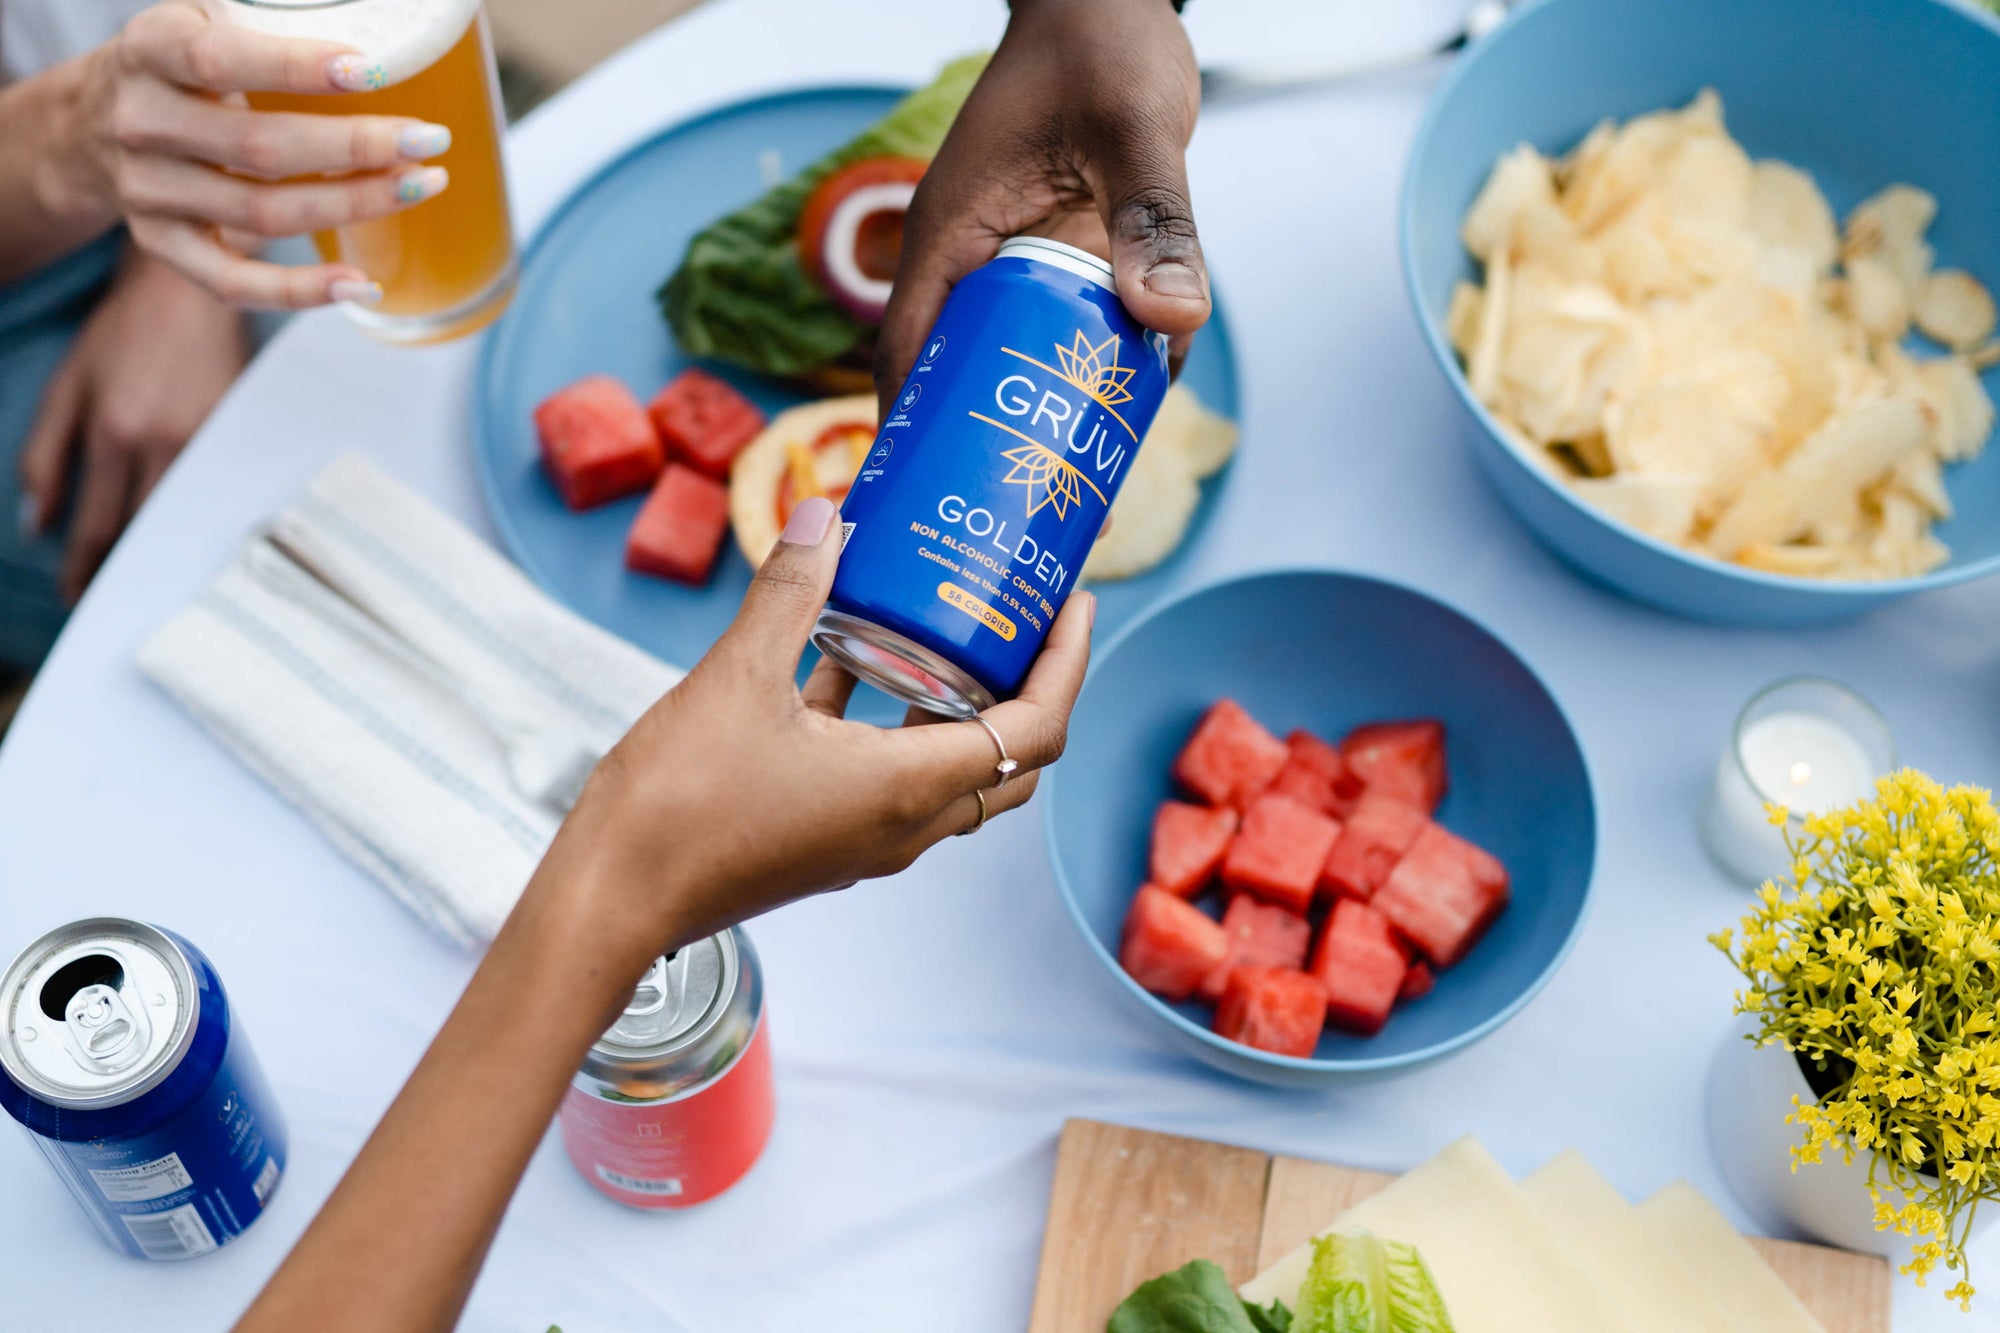 7 Gluten-Reduced, Non-Alcoholic Beers to Savor This Spring